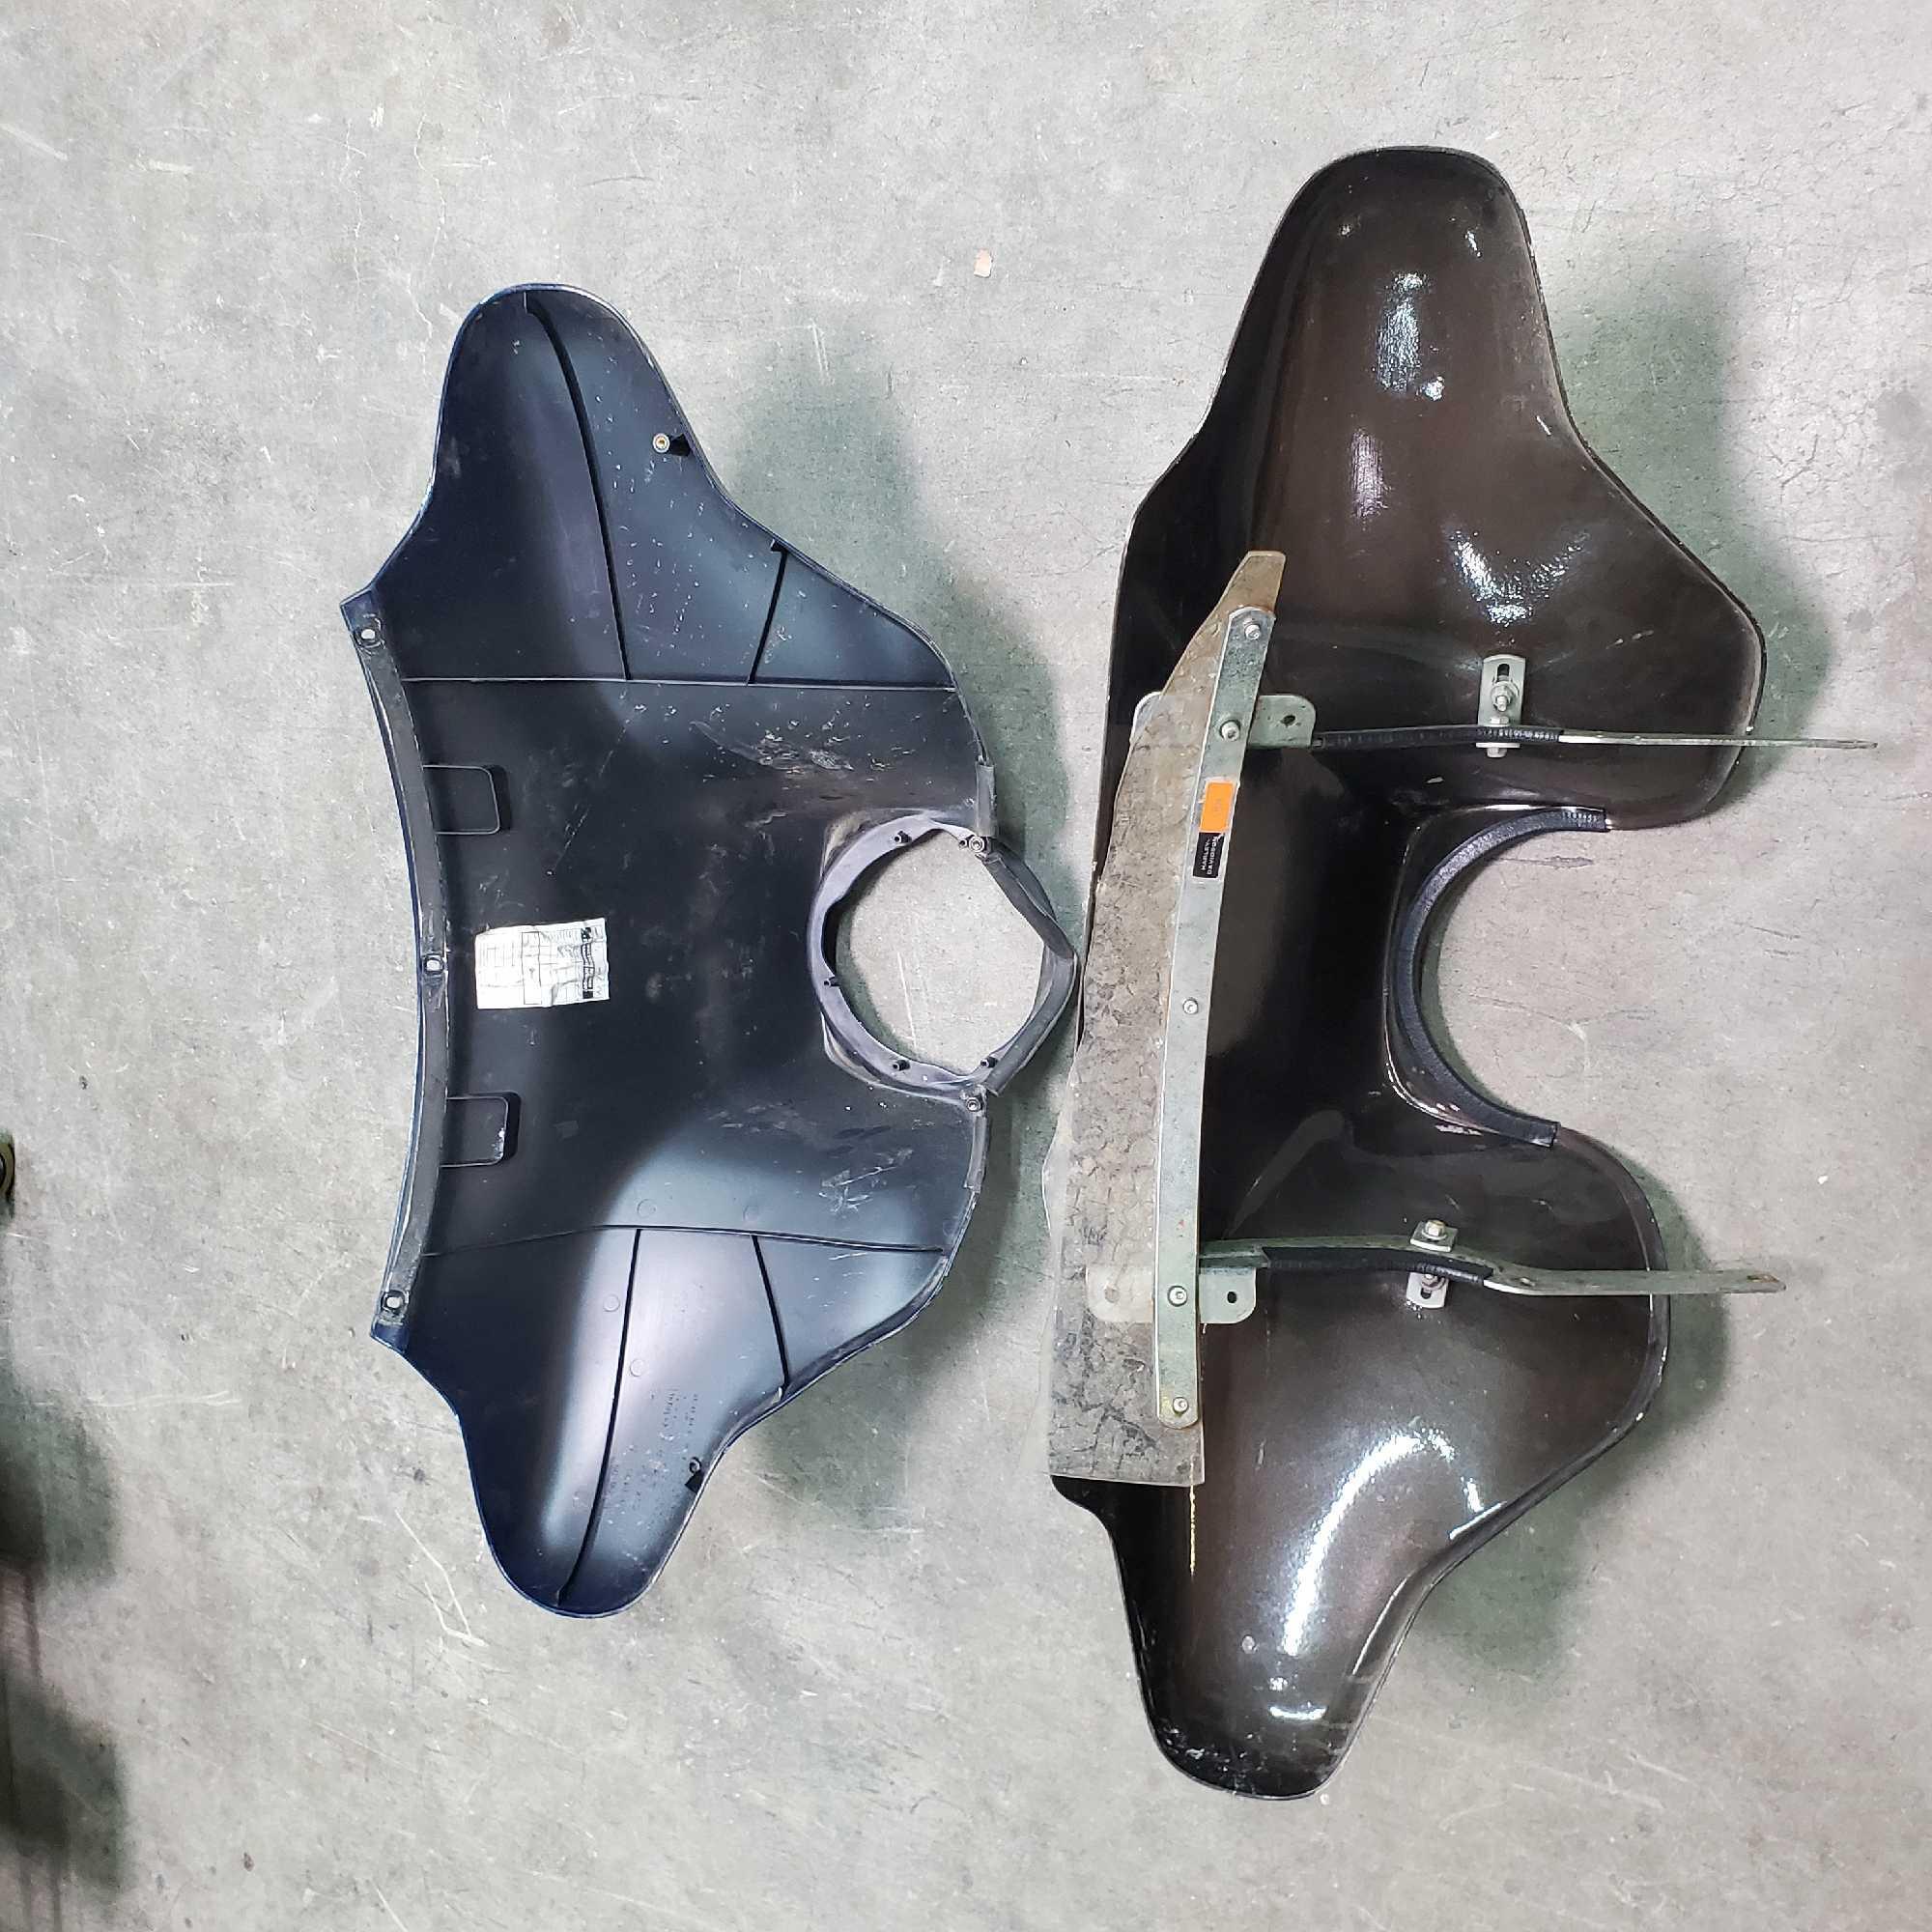 2 Harley Davidson front outer fairings